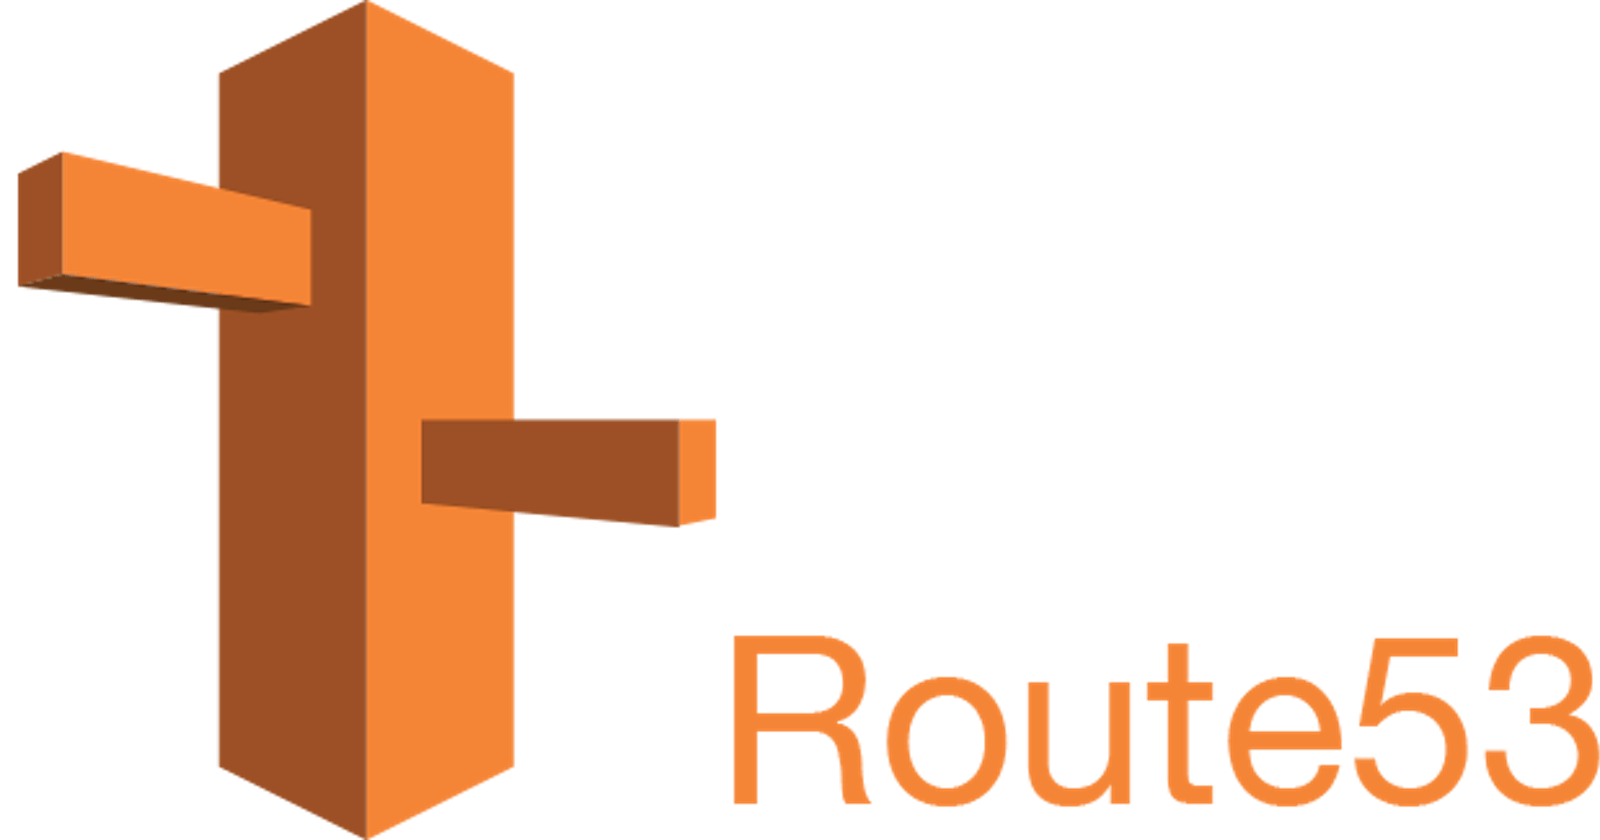 Create Subdomain Dynamically Using Amazon Web Services(AWS) Route 53 With Node.js